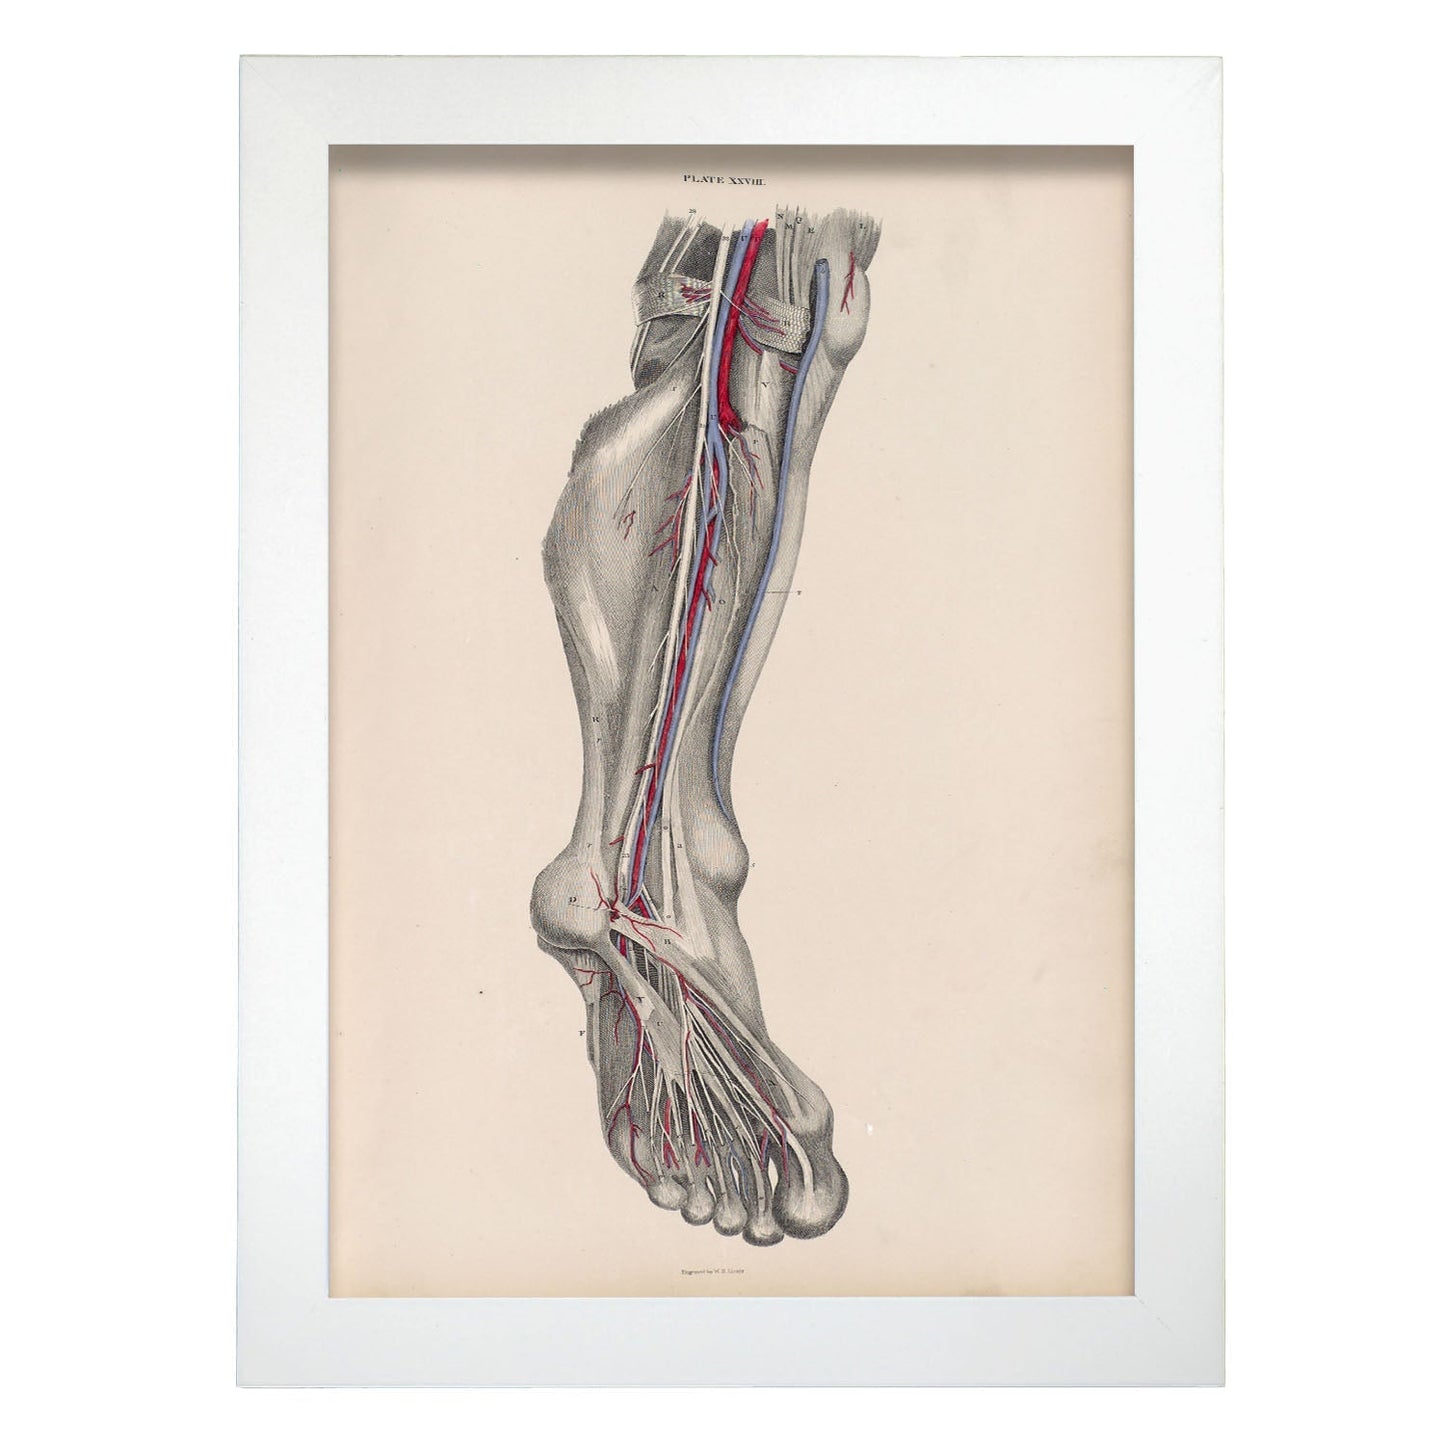 Dissection of the lower leg and foot-Artwork-Nacnic-A4-Marco Blanco-Nacnic Estudio SL